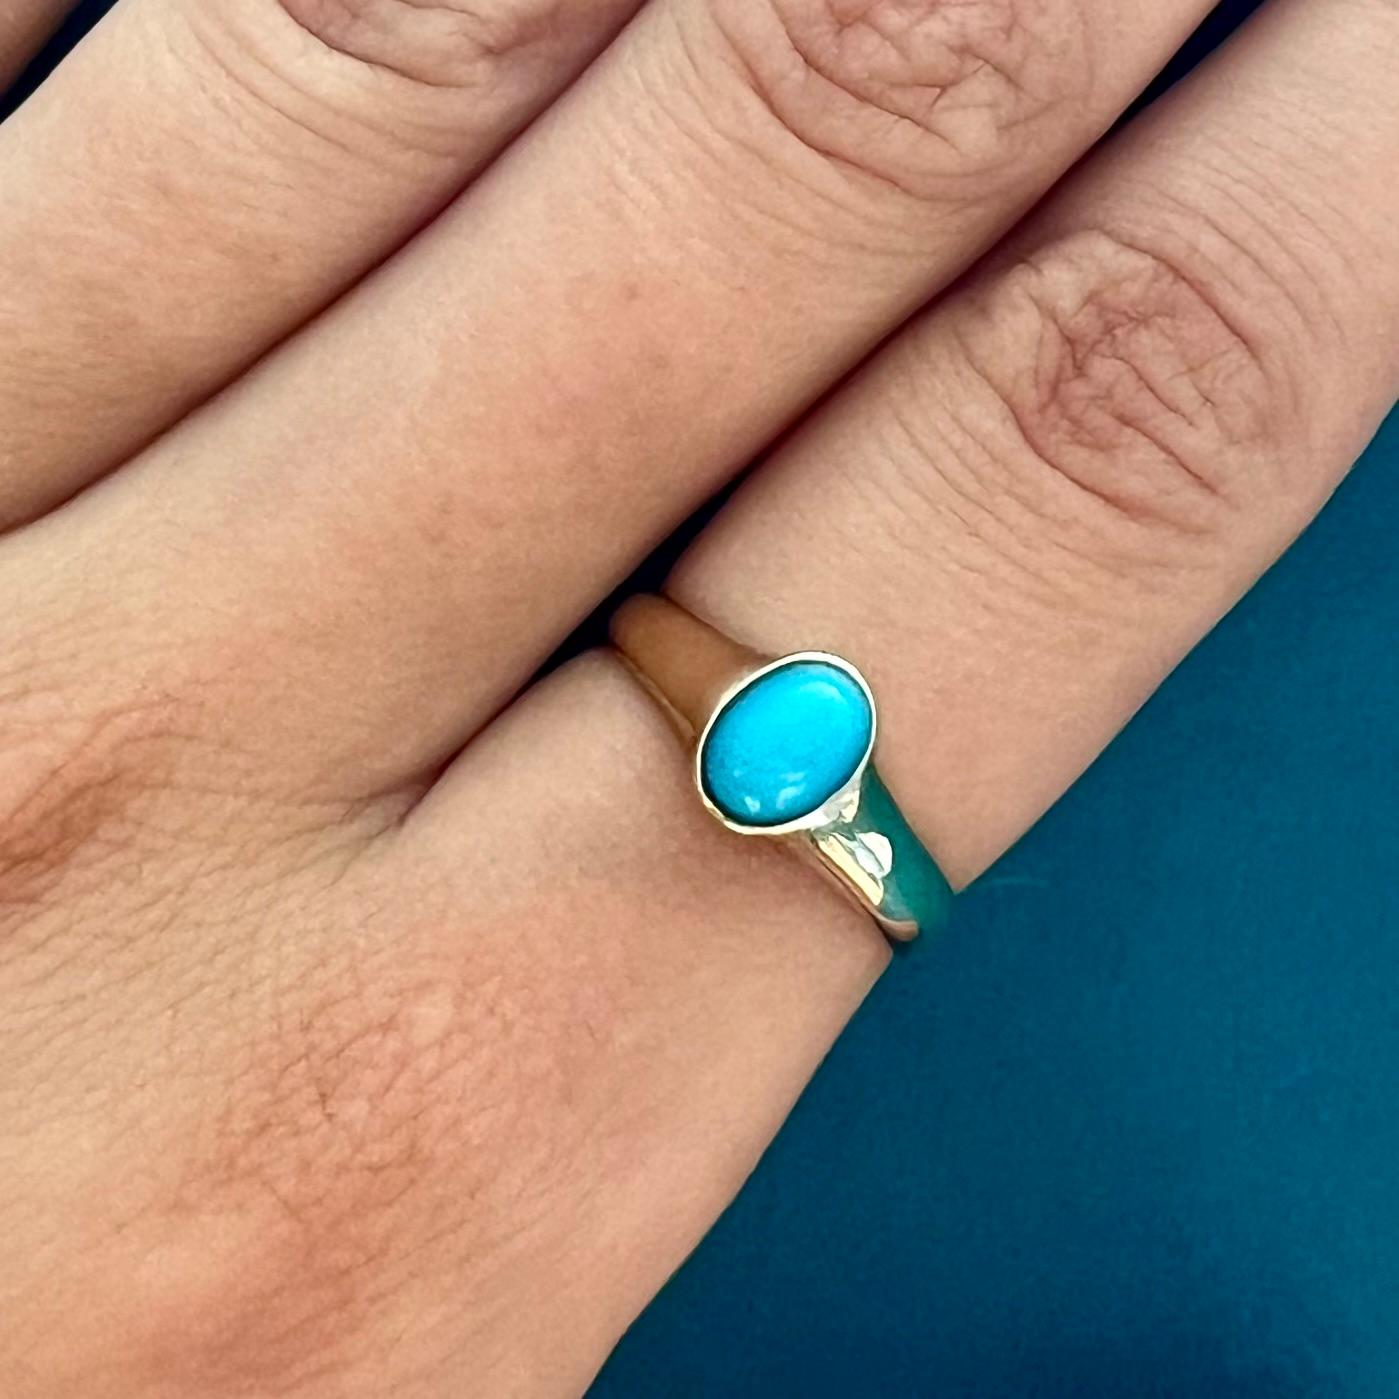 A lovely turquoise ring set in a gold band. The turquoise stone is oval shaped and set in a high polished 14 karat gold frame. The gold of the ring has a small openwork design on both sides of the stone. It is said that turquoise connect heaven and